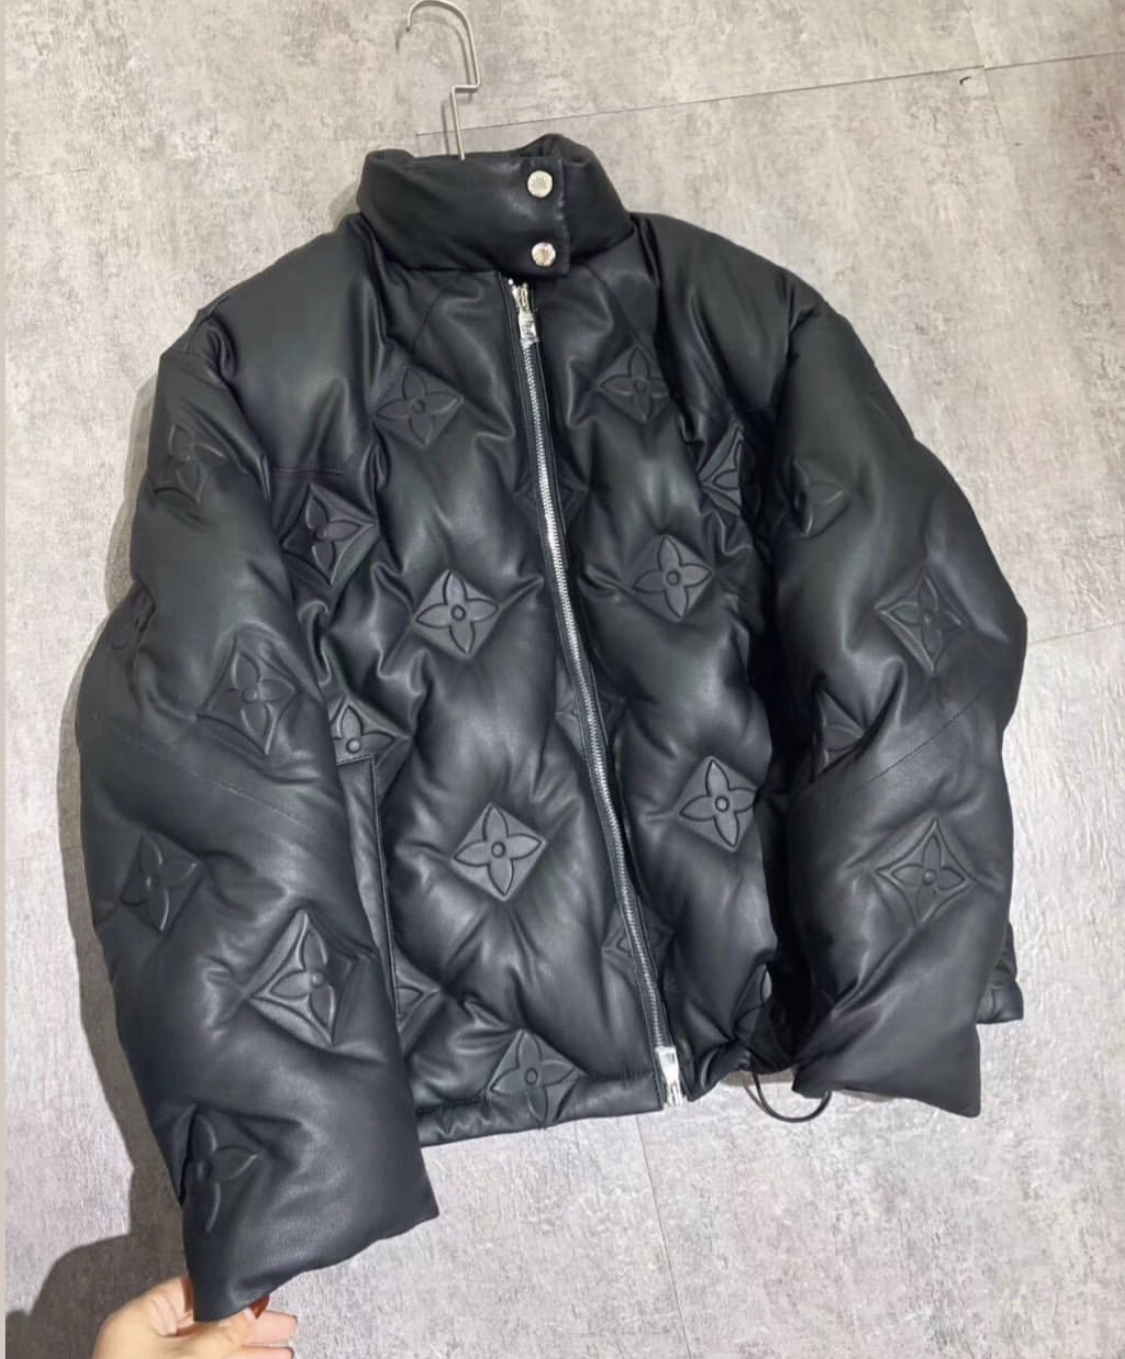 About Louis Vuitton Leather Jacket